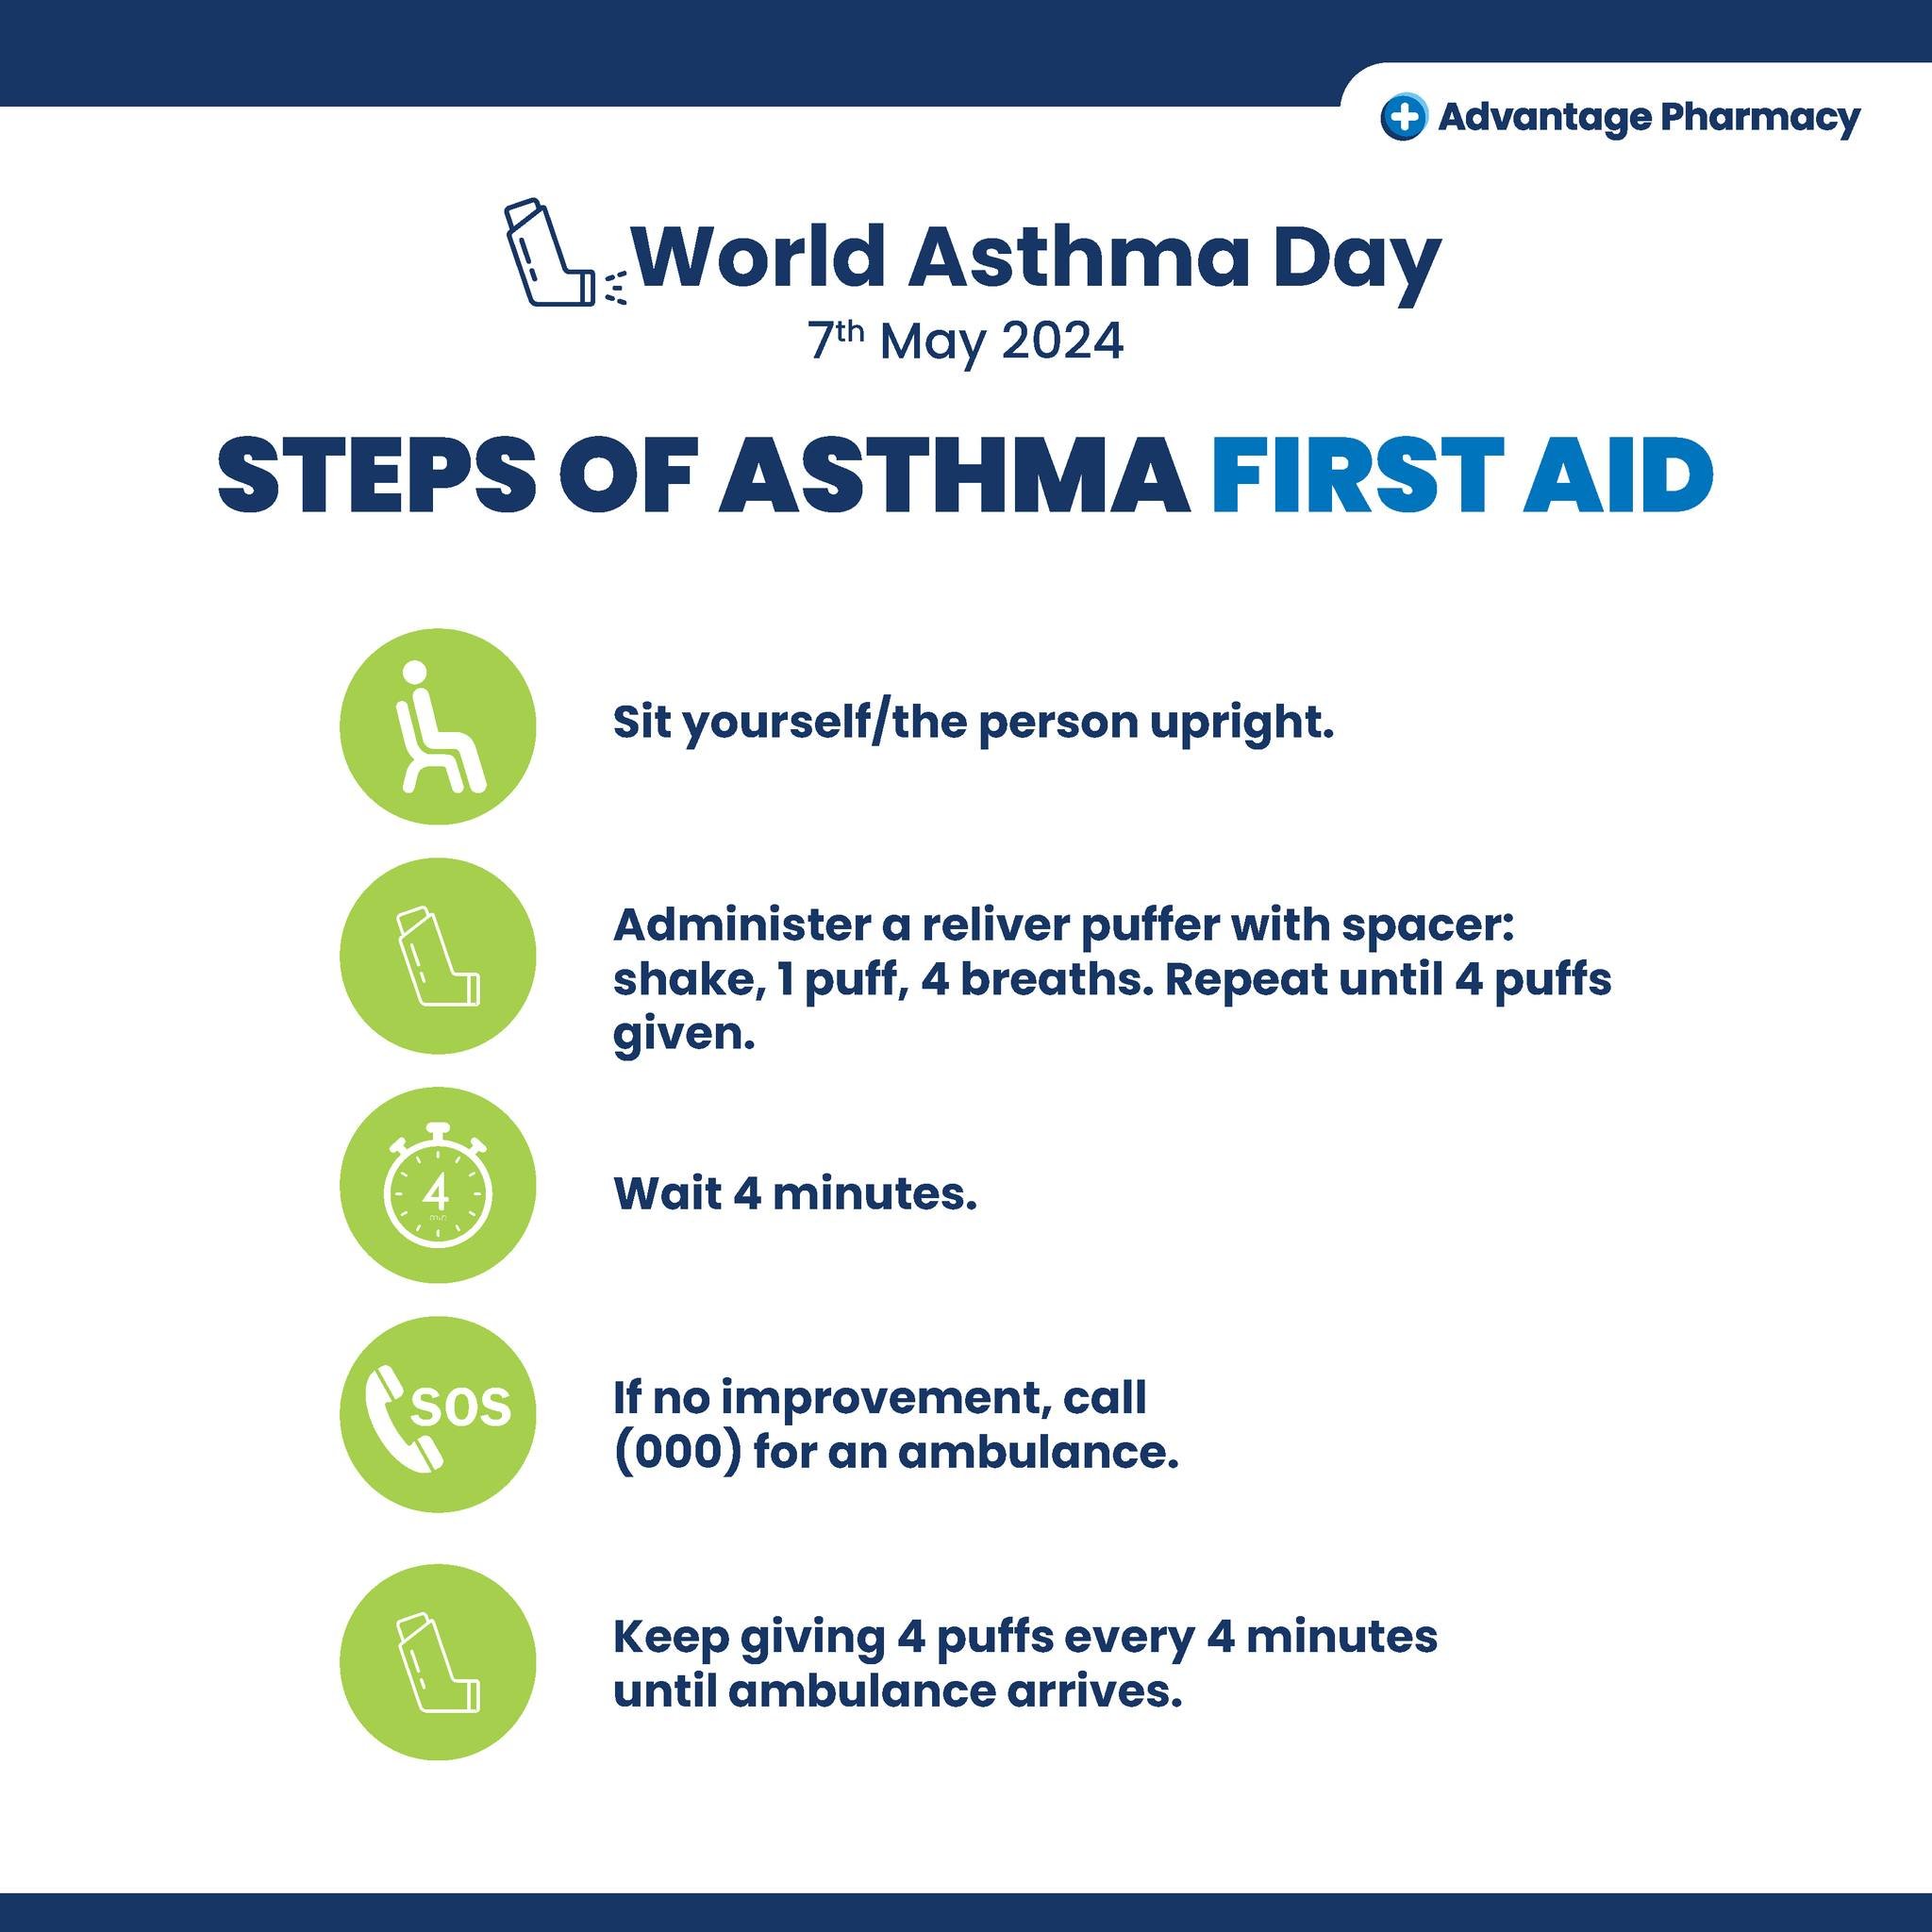 Asthma impacts nearly 2.8 million Australians, so today on World Asthma Day, so we wanted to make sure that you are properly informed about Asthma first aid!
If you or someone you know is affected by asthma, visit us in-store today to see how our Pha